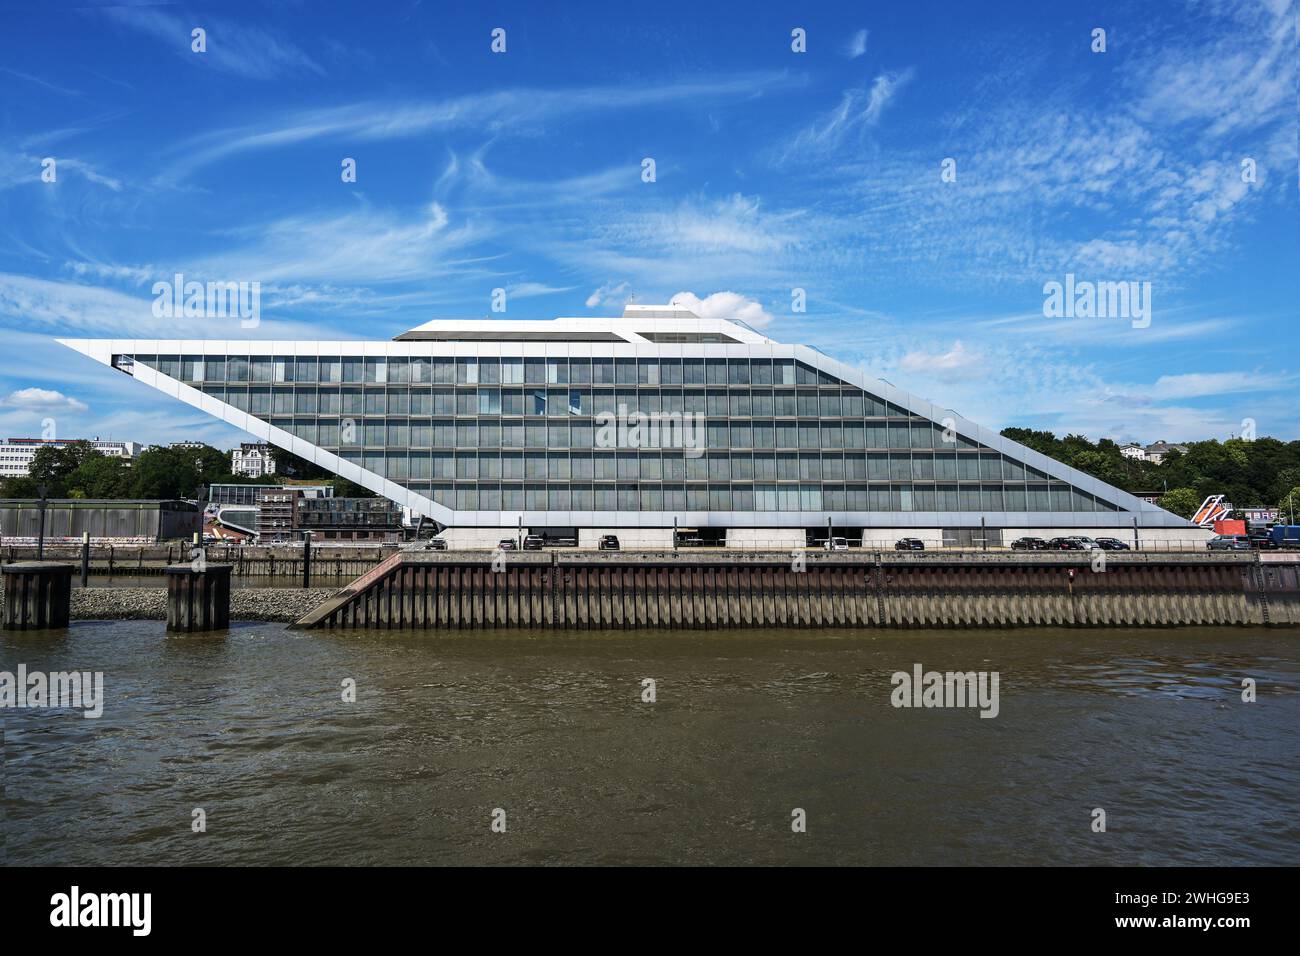 Dockland Hamburg, Germany, modern office building in the shape of a parallelogram, famous landmark and popular viewing platform, Stock Photo